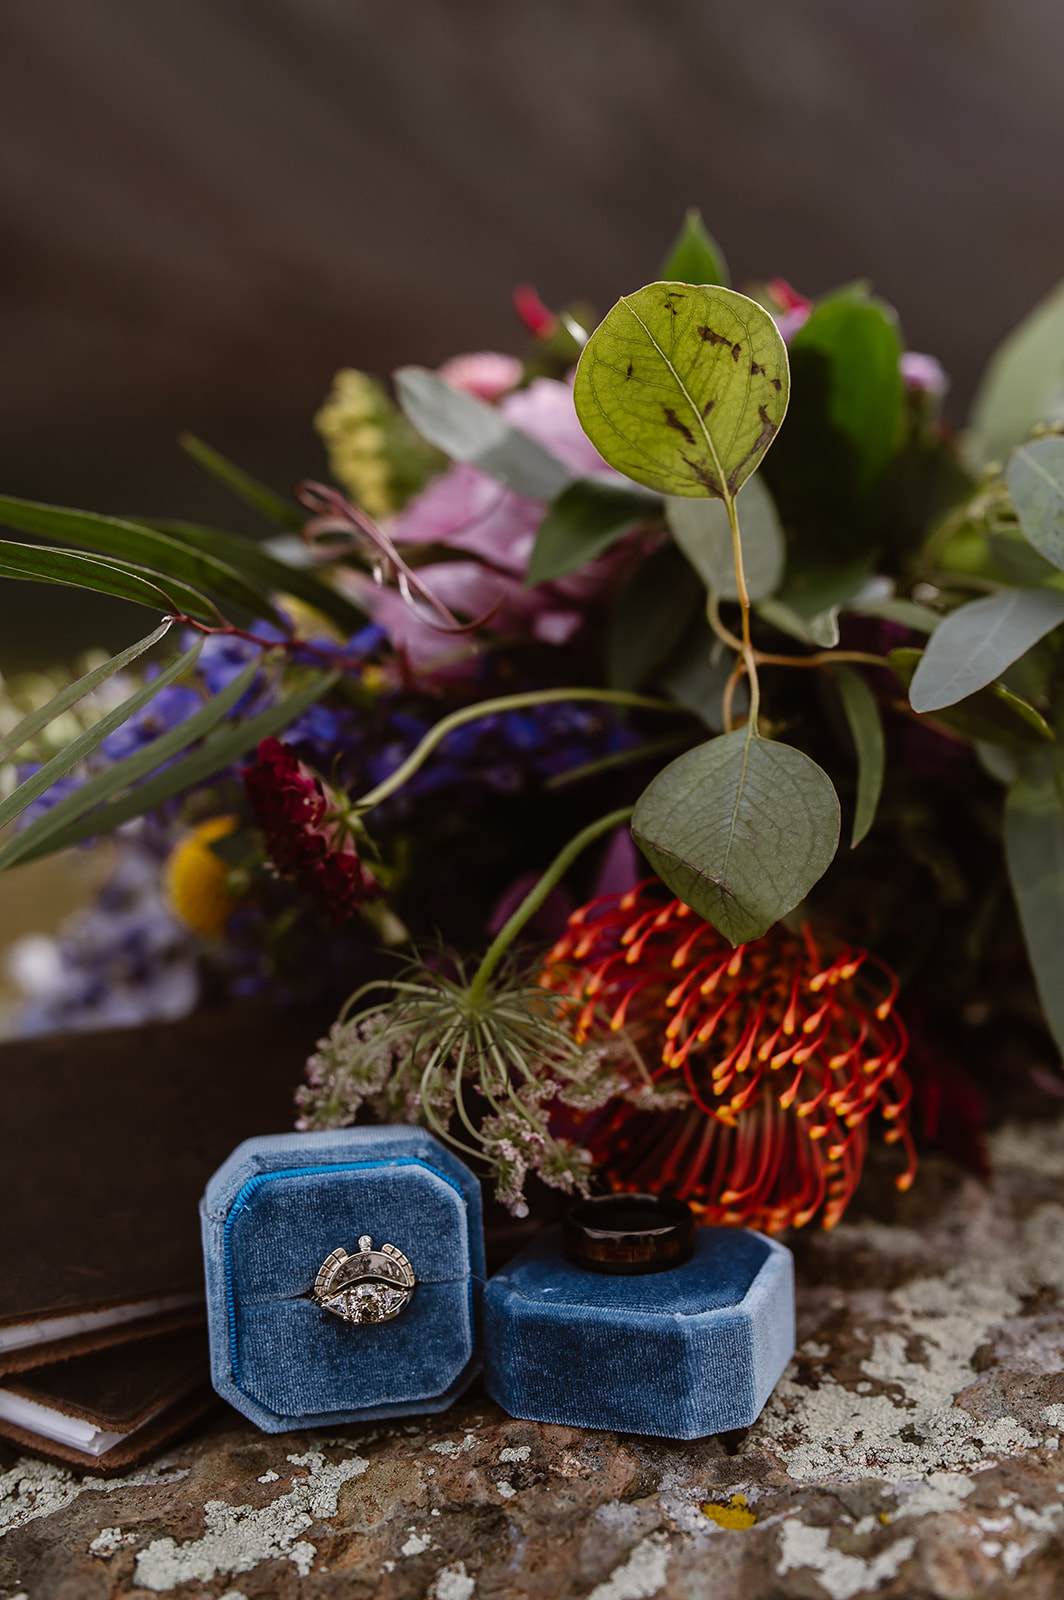 Details for Clear Lake adventure elopement. Bouquet, rings and leather vow books. 